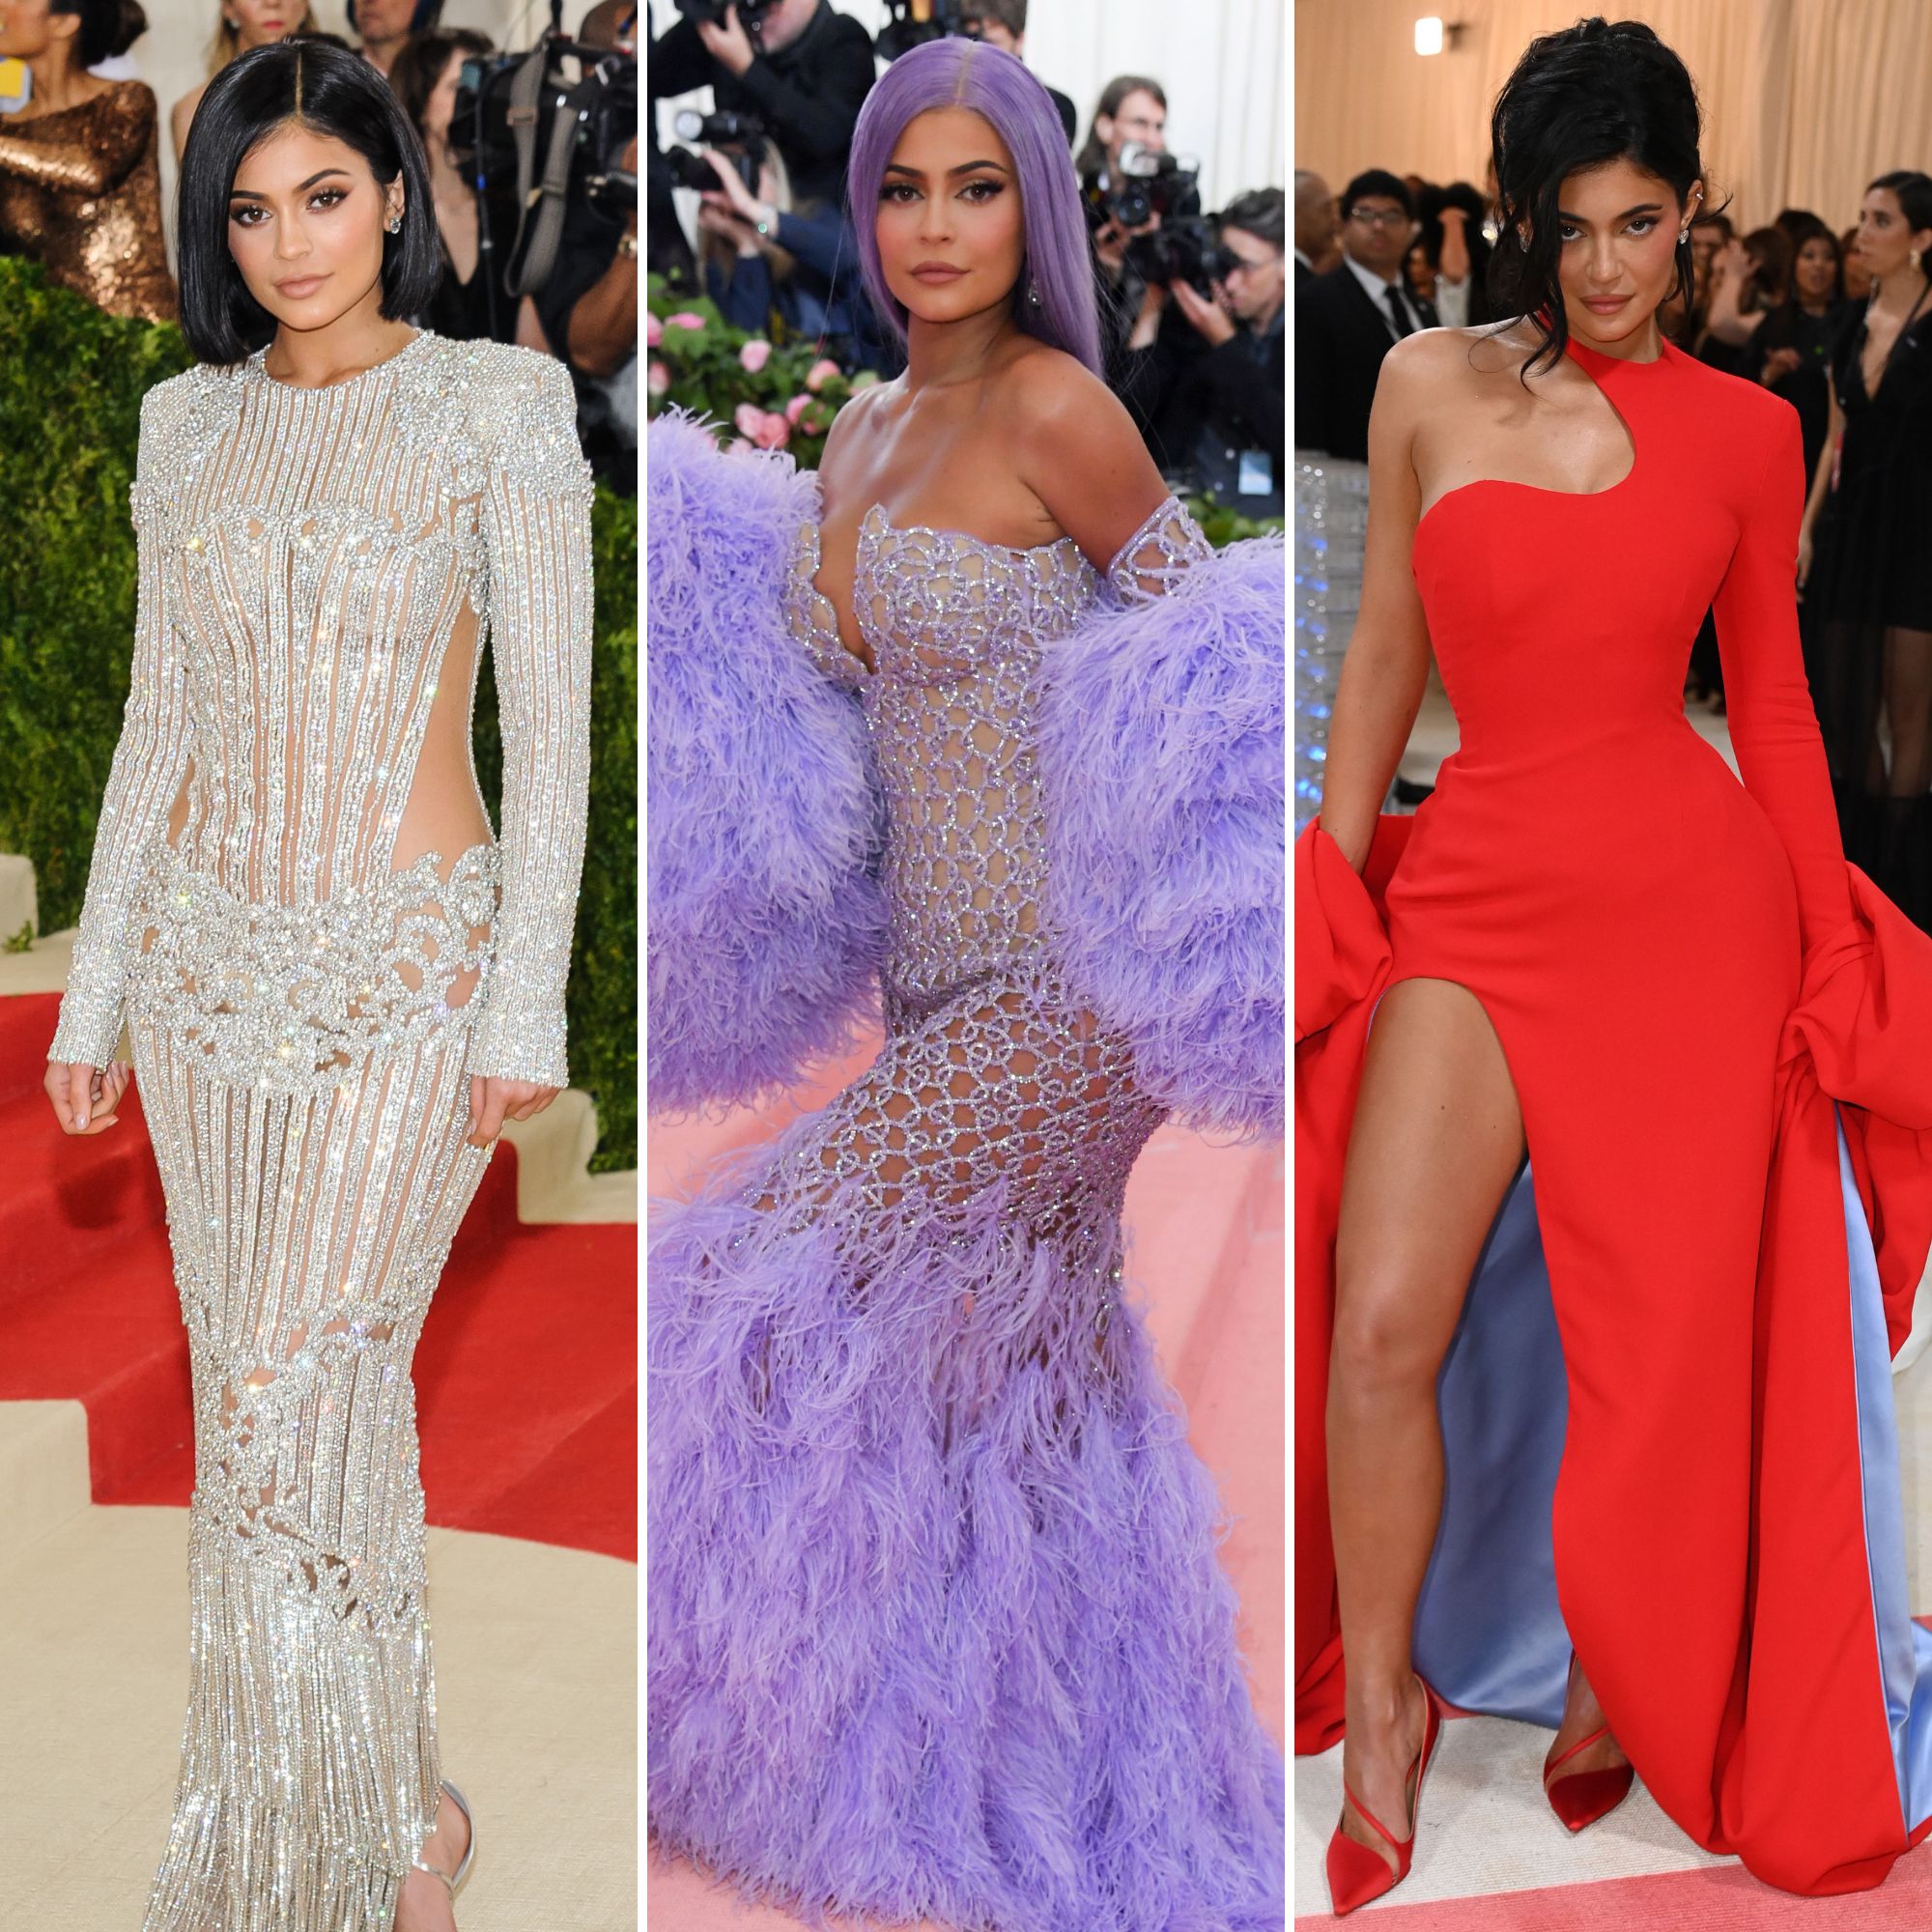 Kendall Jenner and Kylie Jenner Attend 2019 Met Gala